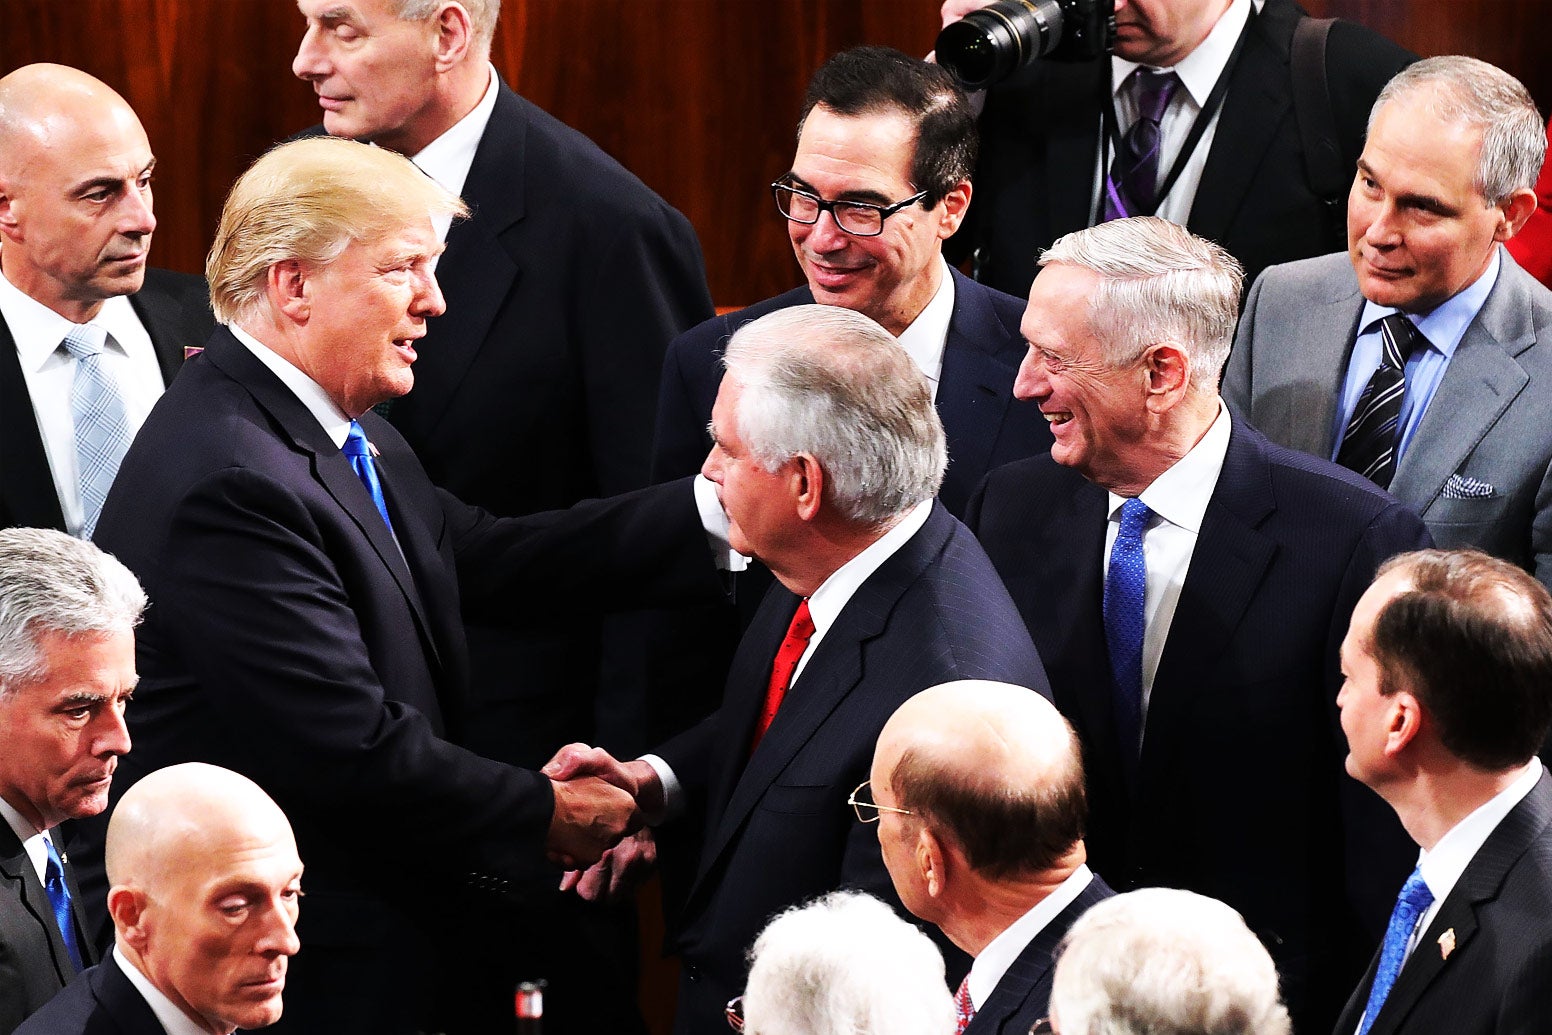 President Donald Trump talks with members of his Cabinet, including Treasury Secretary Steven Mnuchin, Secretary of State Rex Tillerson, Defense Secretary James Mattis, and EPA Administrator Scott Pruitt, following the State of the Union address in the chamber of the House of Representatives on Jan. 30 in Washington.